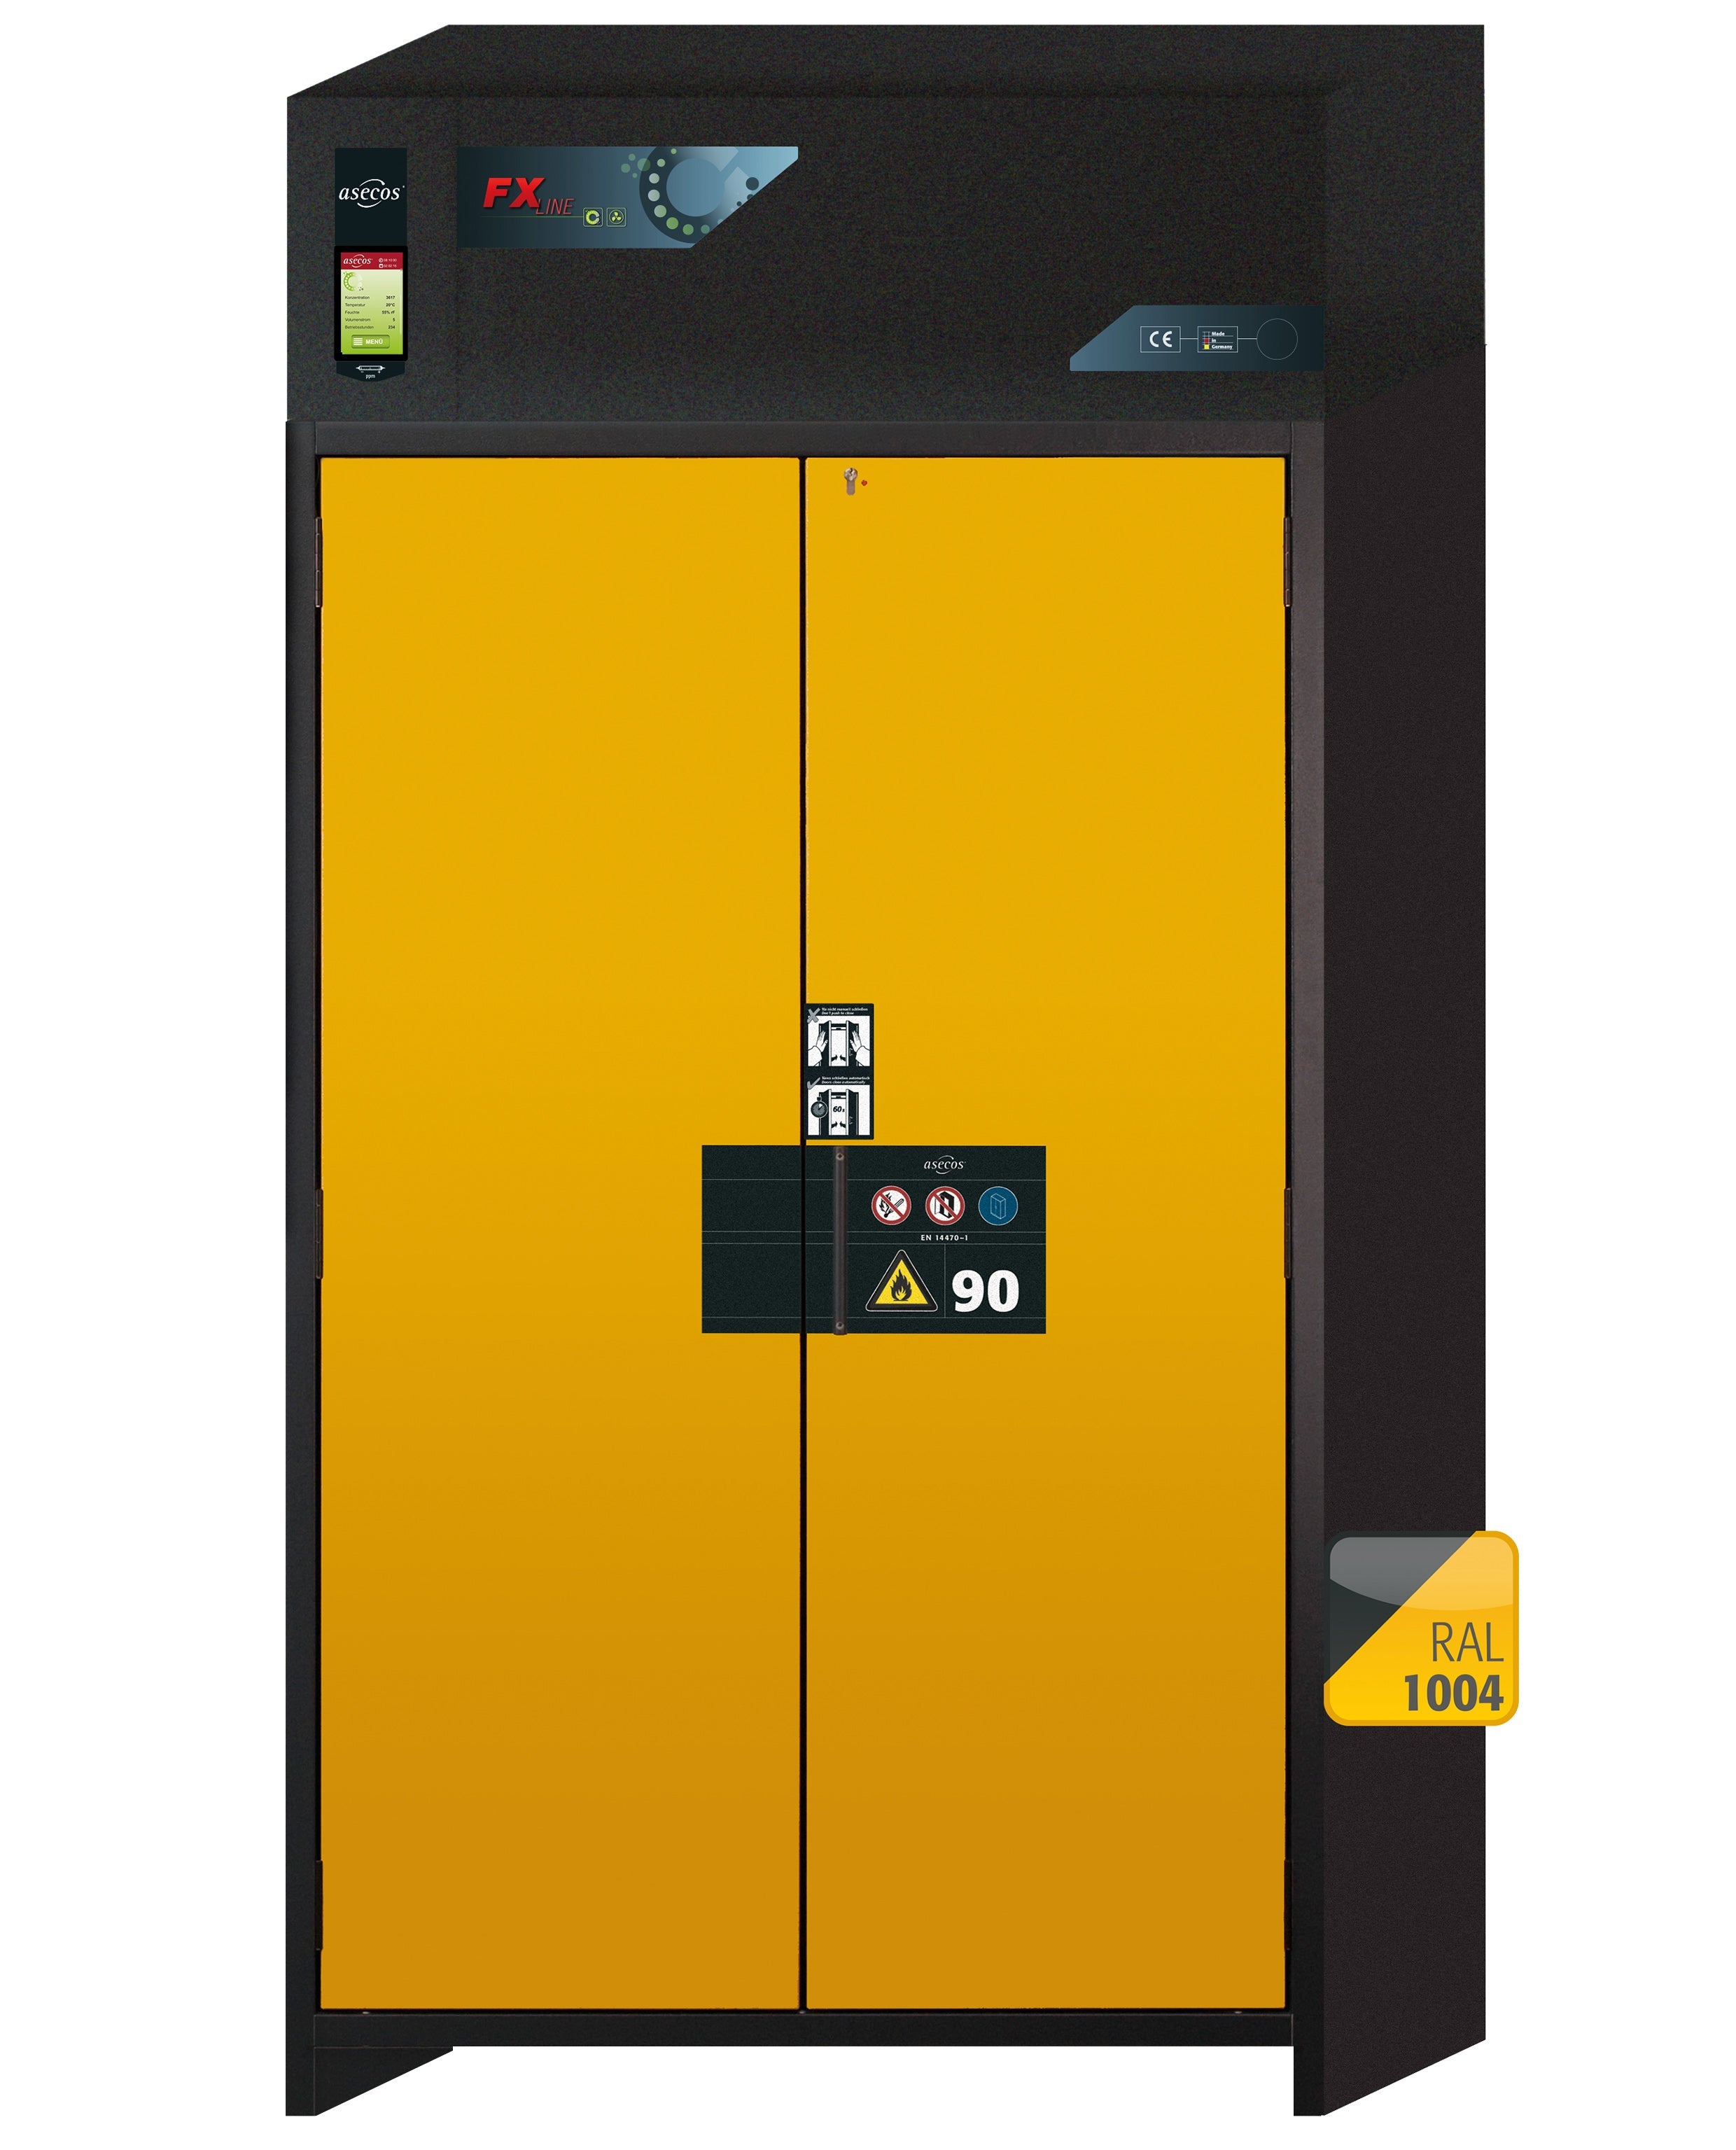 Type 90 recirculating air filter cabinet FX-PEGASUS-90 model FX90.229.120.WDAC in safety yellow RAL 1004 with 3x standard pull-out tray (sheet steel)